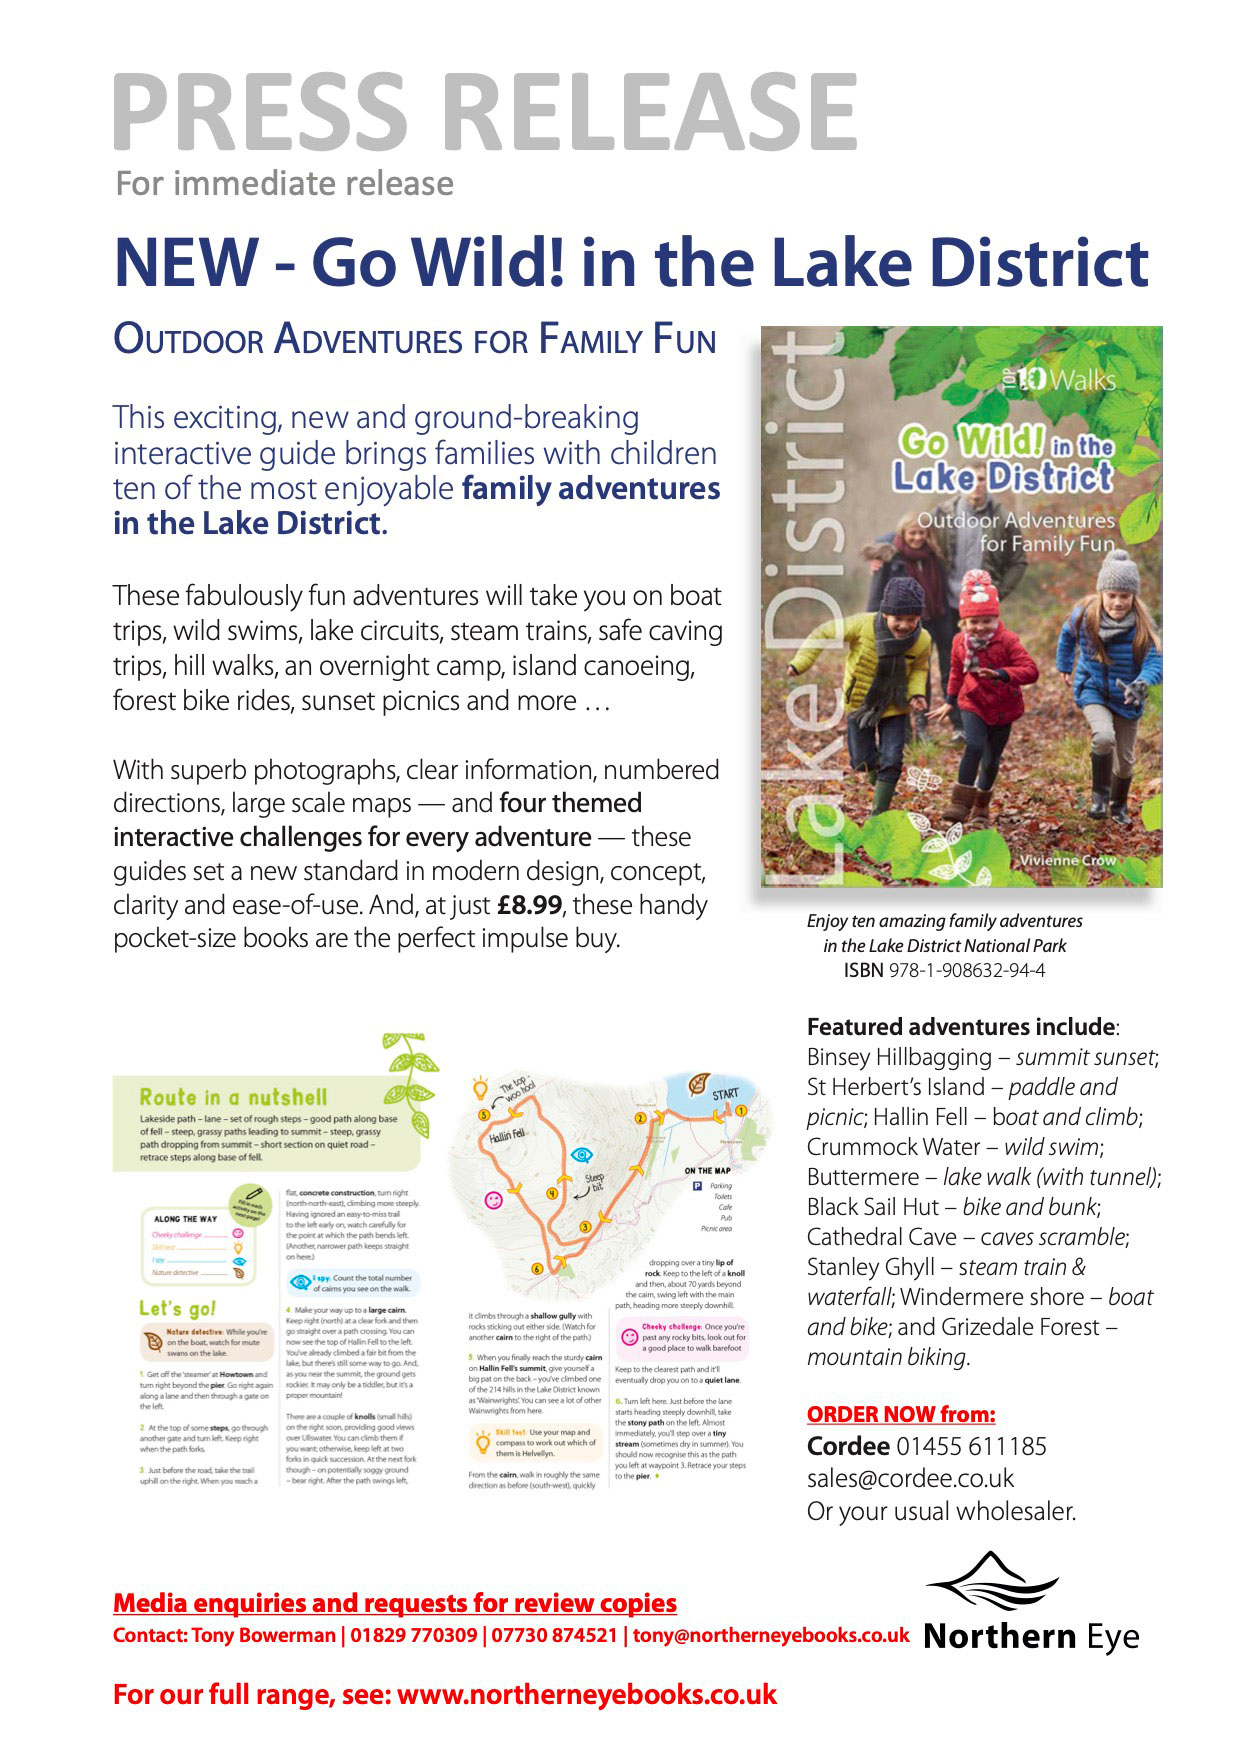 Go Wild! in the Lake District-family adventures for outdoor fun